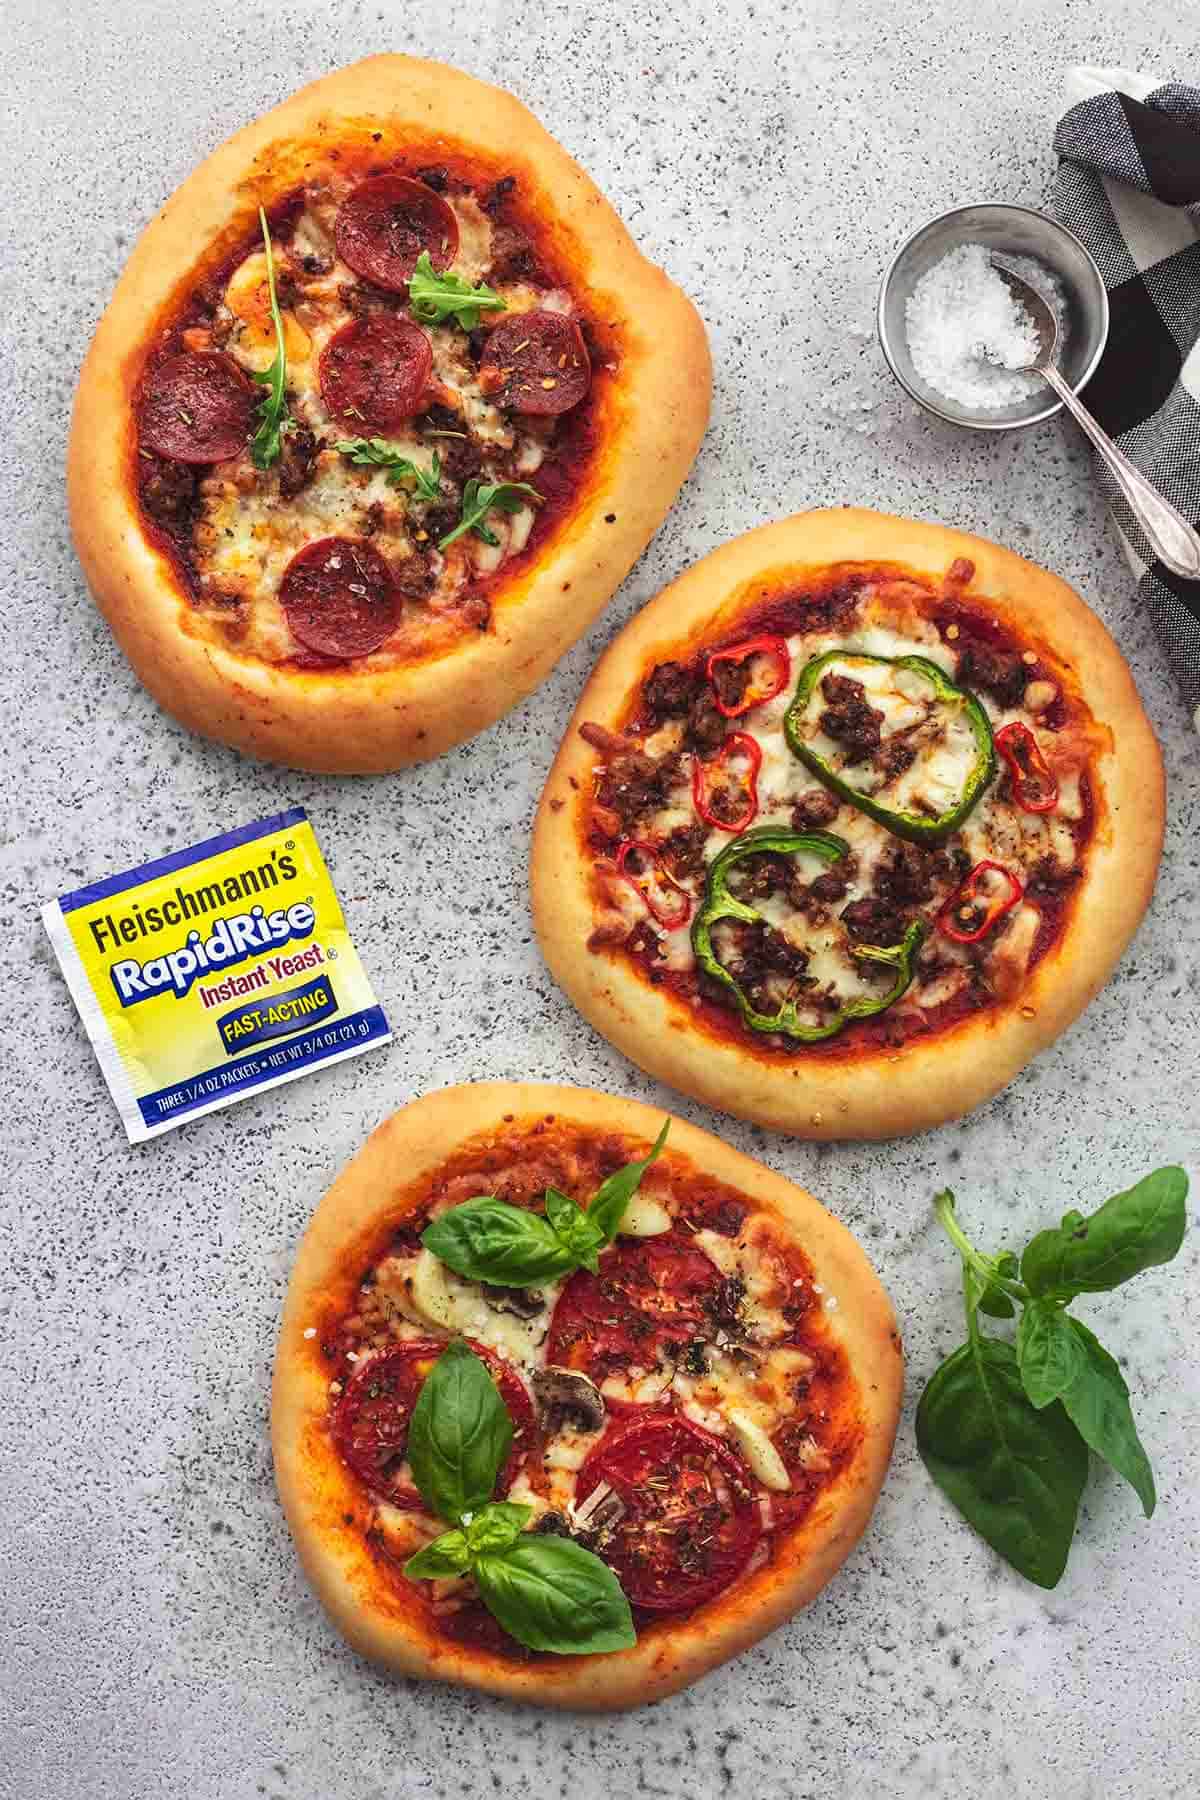 top view of personal pizzas with a yeast packet on the side.